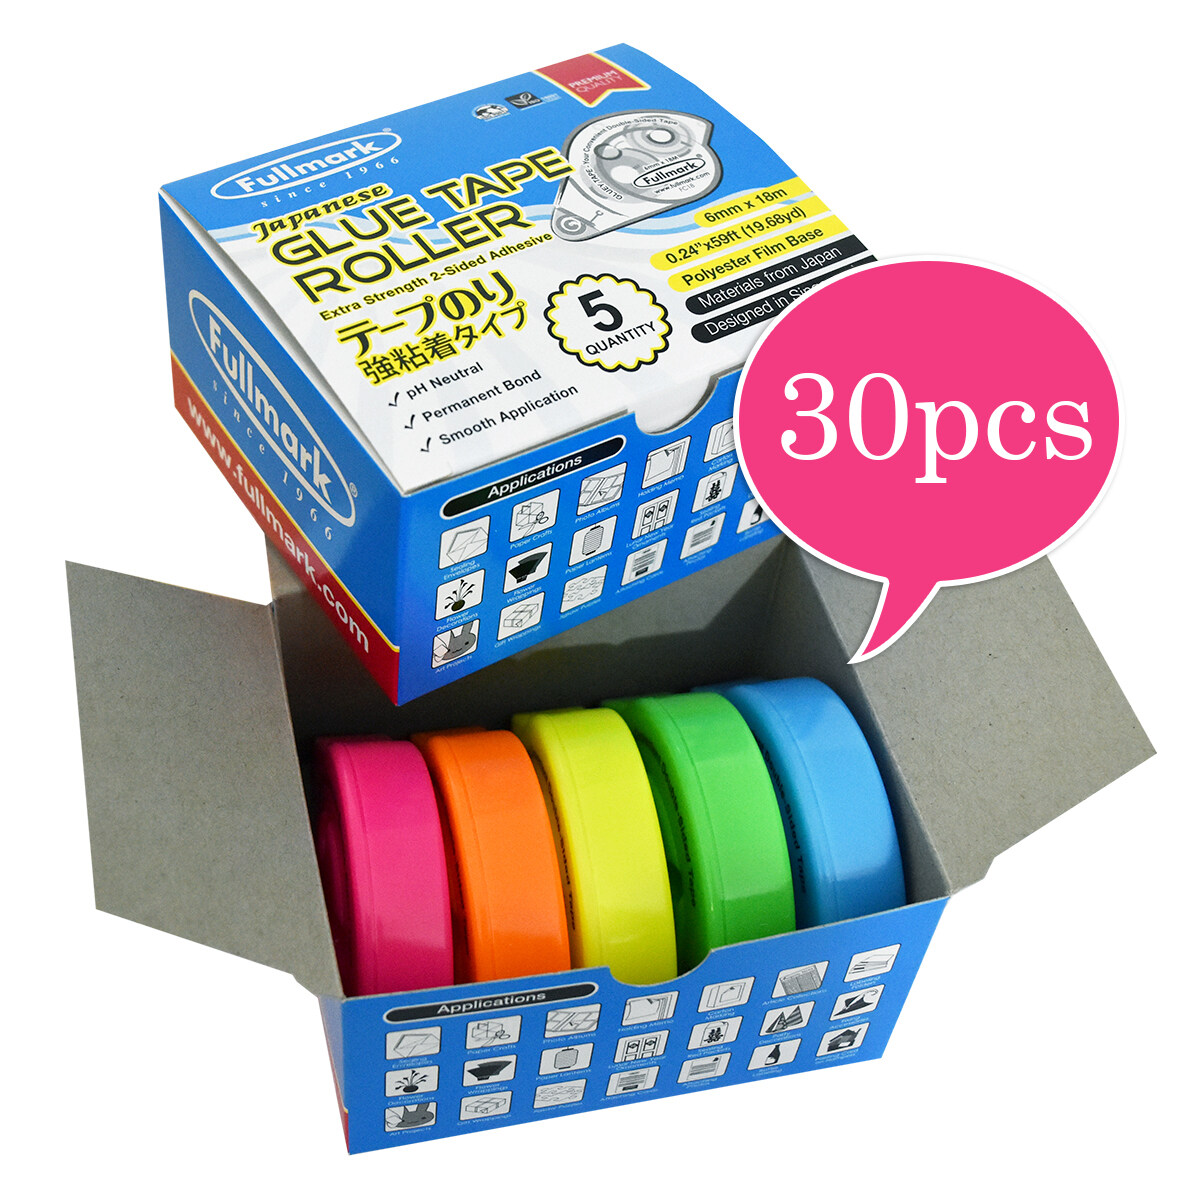 Fullmark Glue Tape Roller / Permanent Adhesive 6 mm x 18 m each (Assorted Colors) x 30 pcs